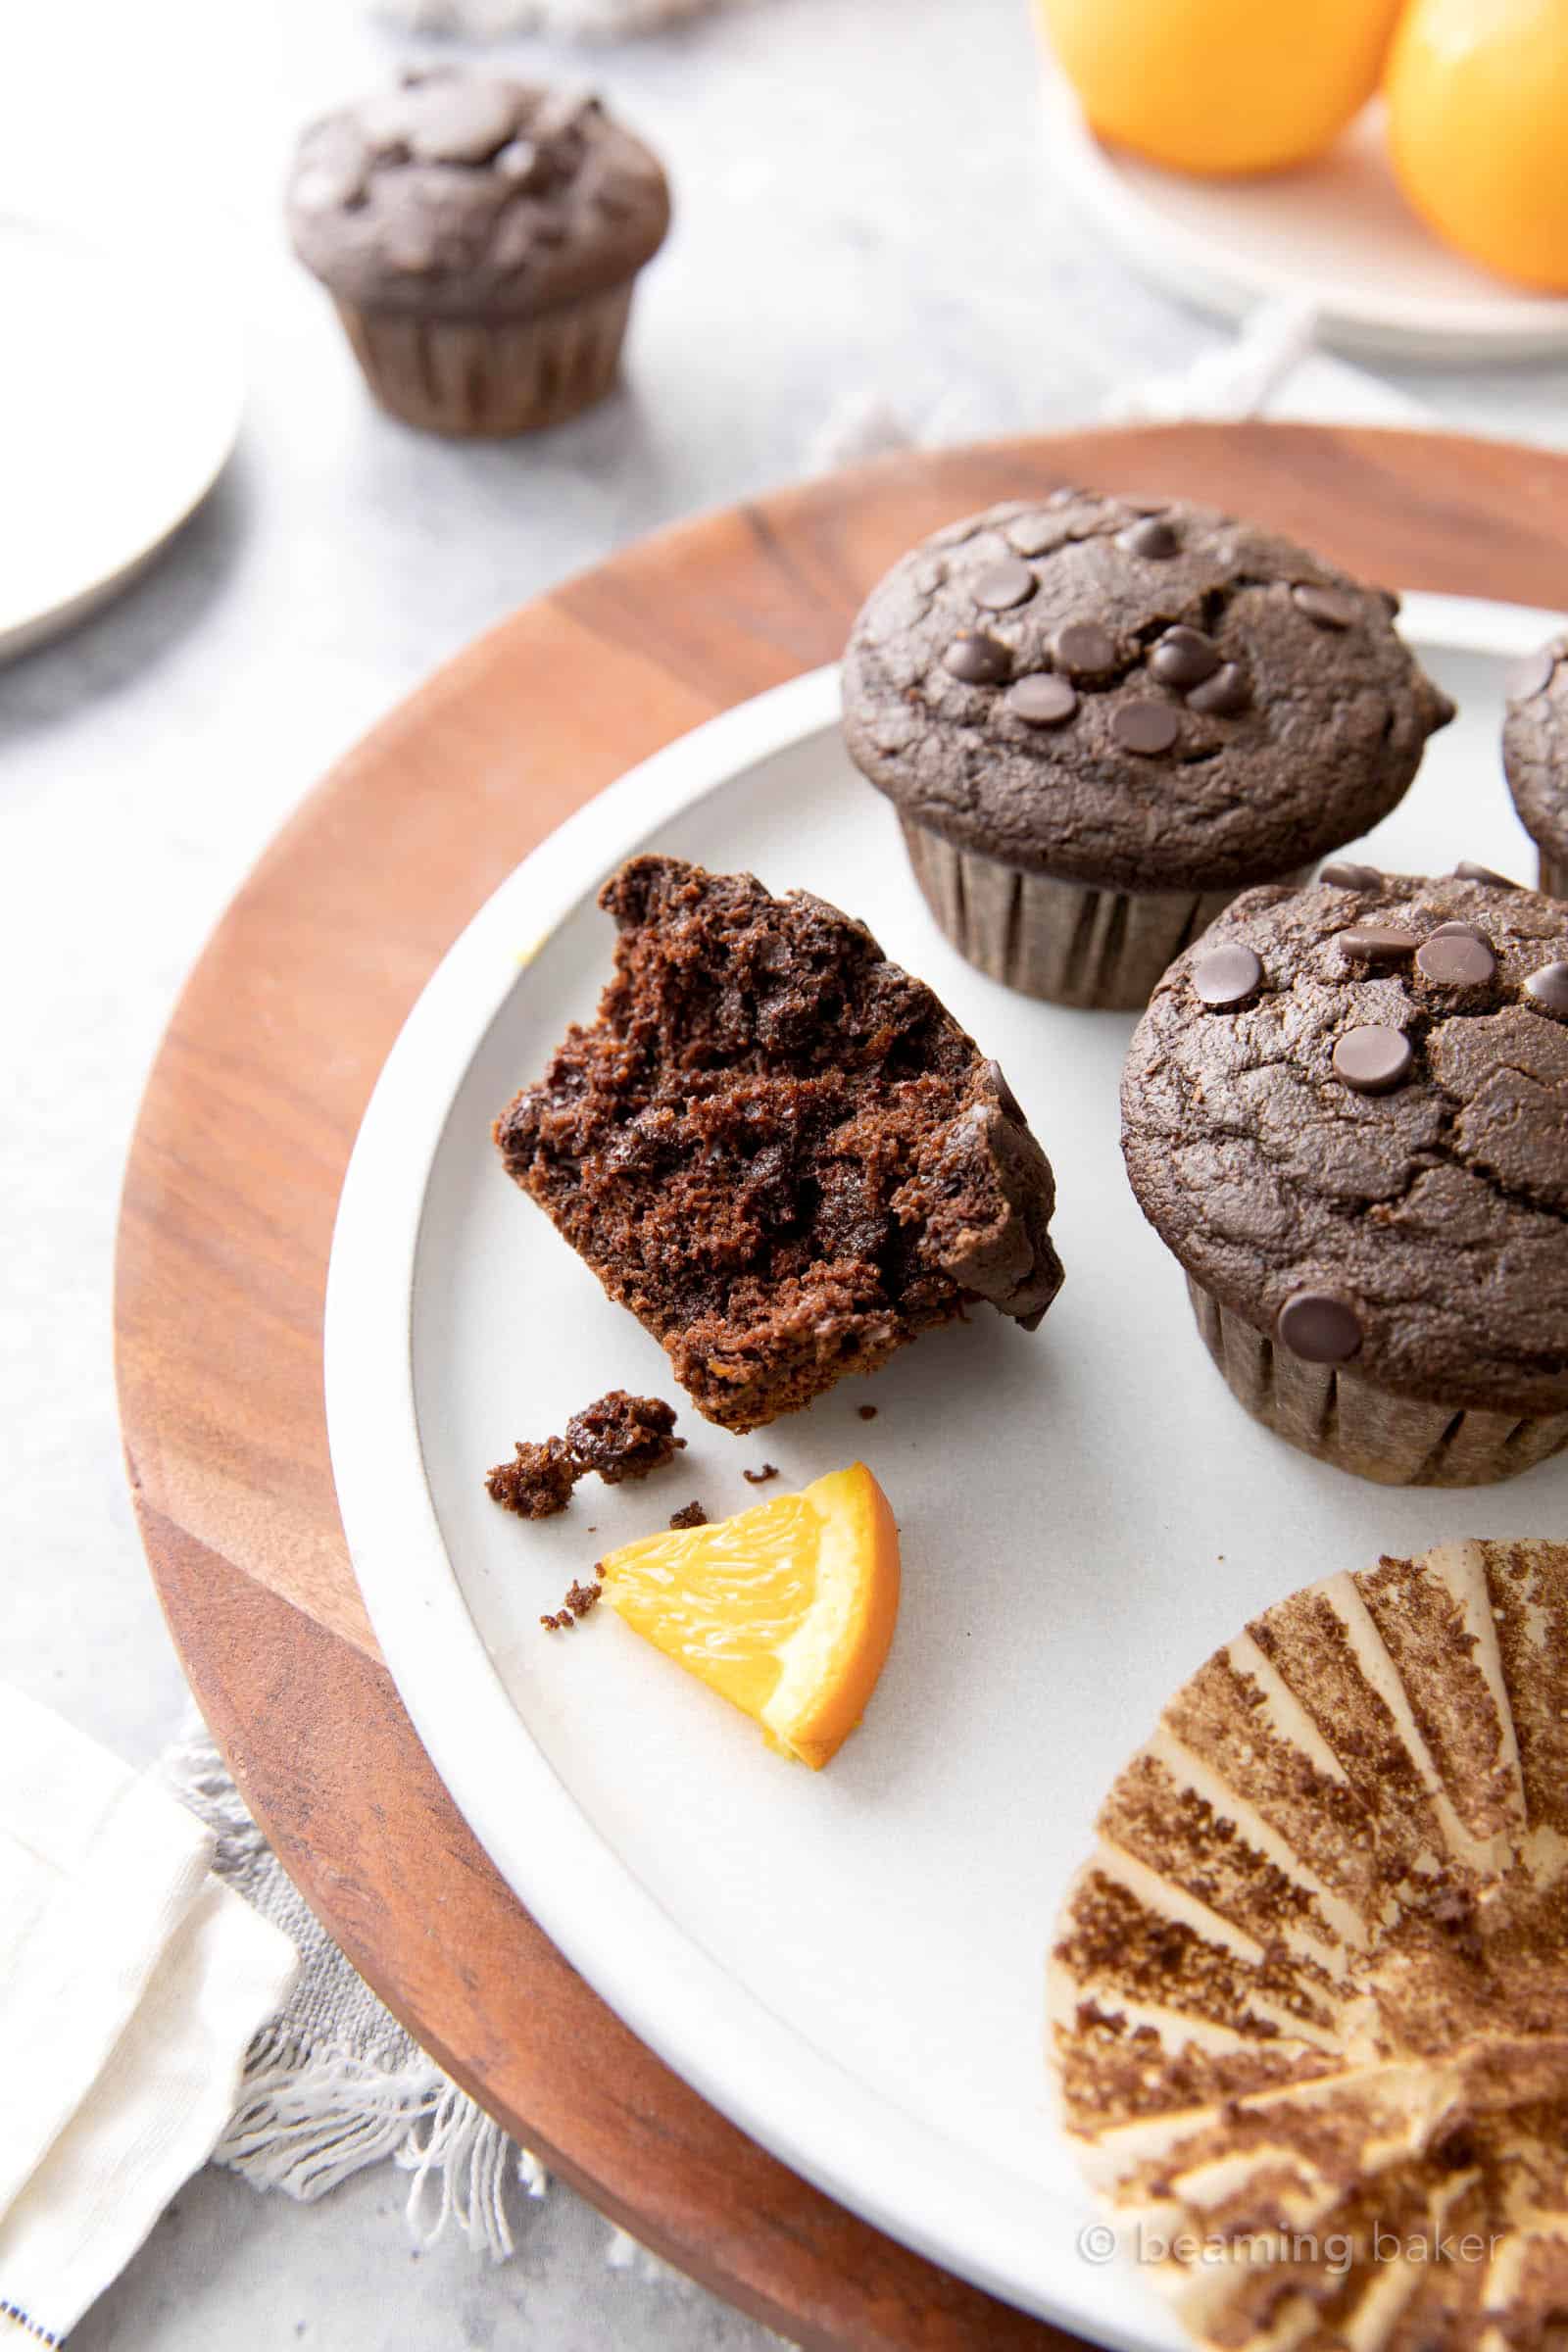 A plate filled with orange chocolate chip muffins and orange slices